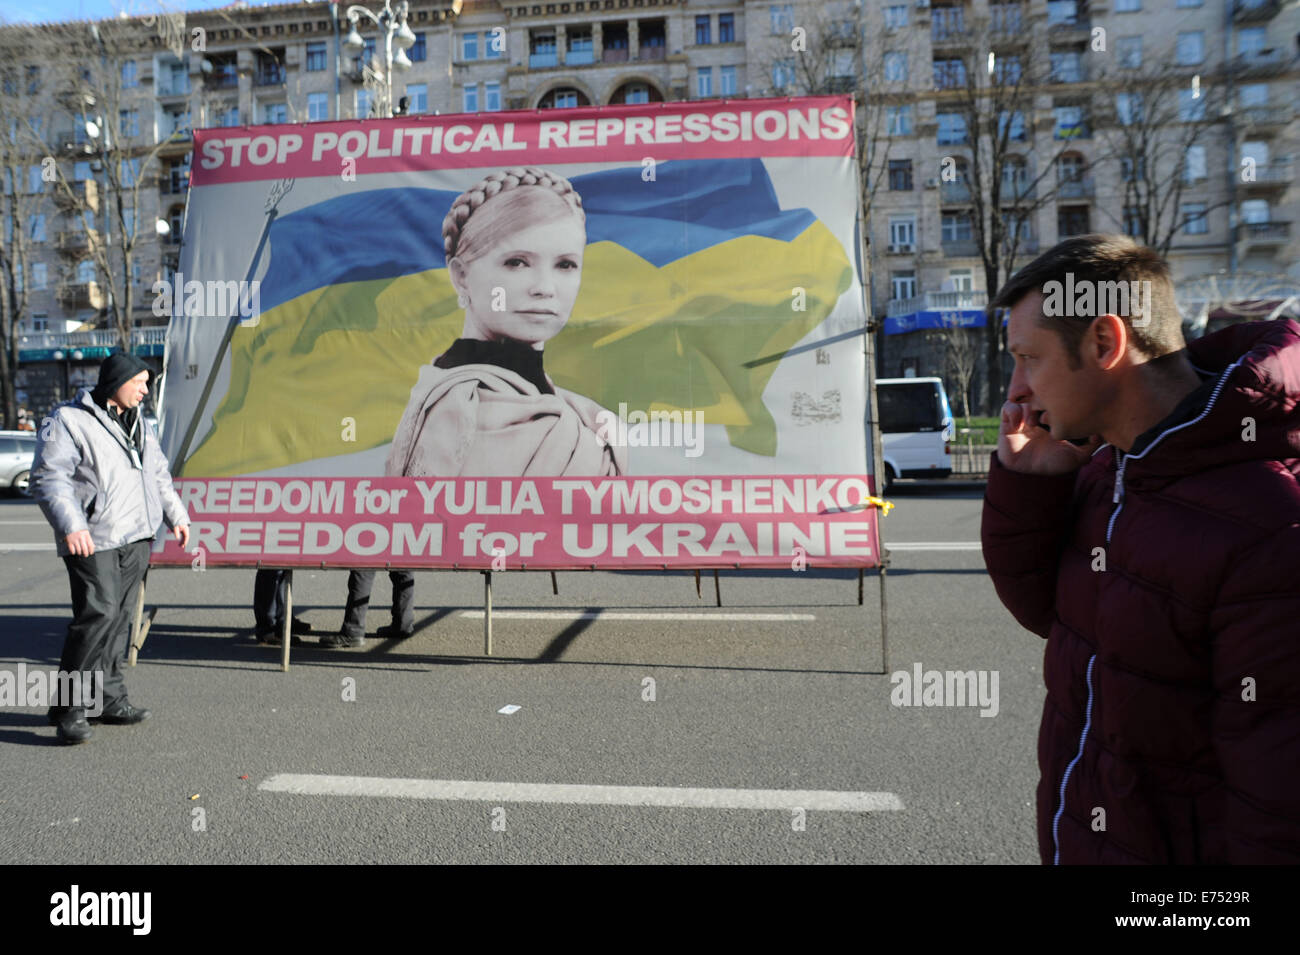 Ukrainian protesters carry a banner calling for the release of Yulia Tymoshenko during the protests in Maidan in December 2013. Stock Photo